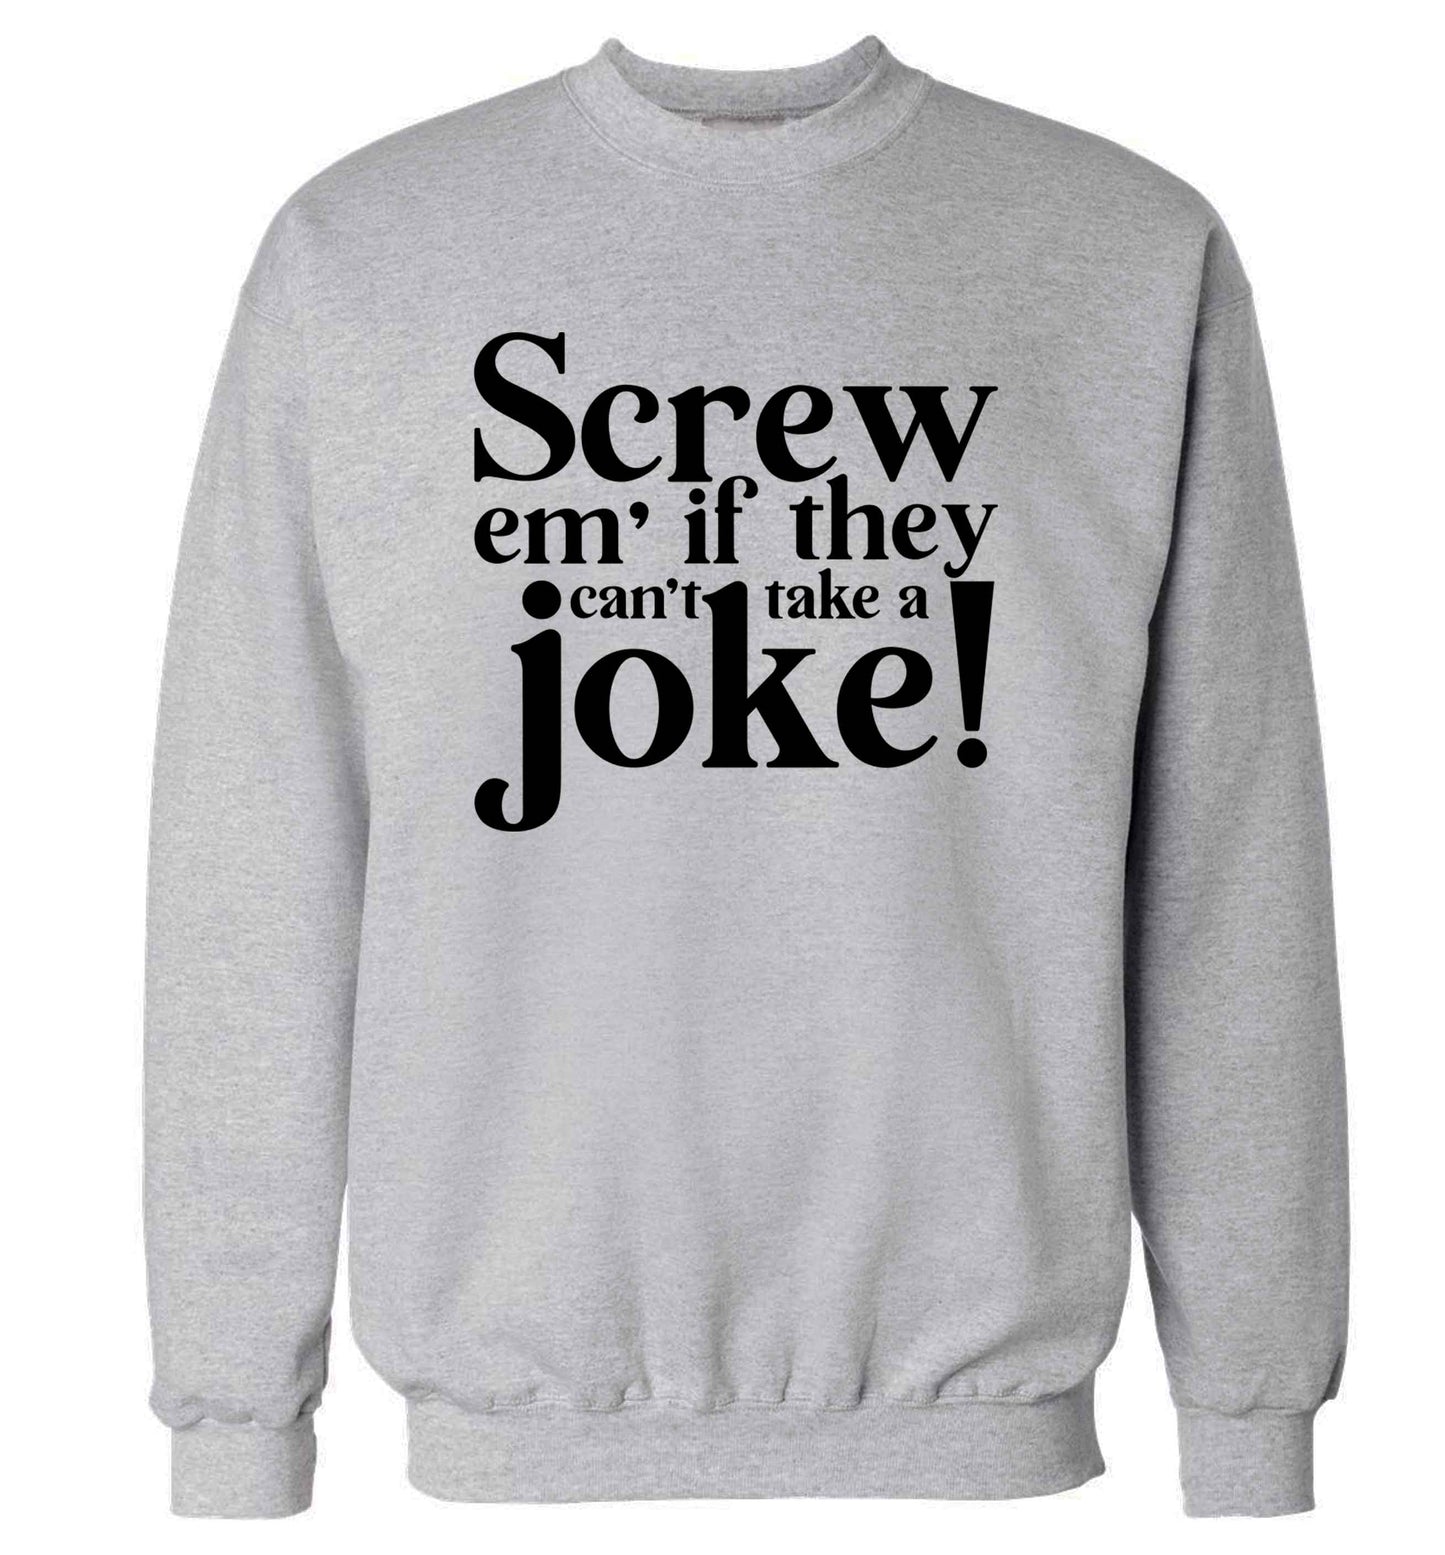 We love this for YOU! Who else loves saying this?!  adult's unisex grey sweater 2XL